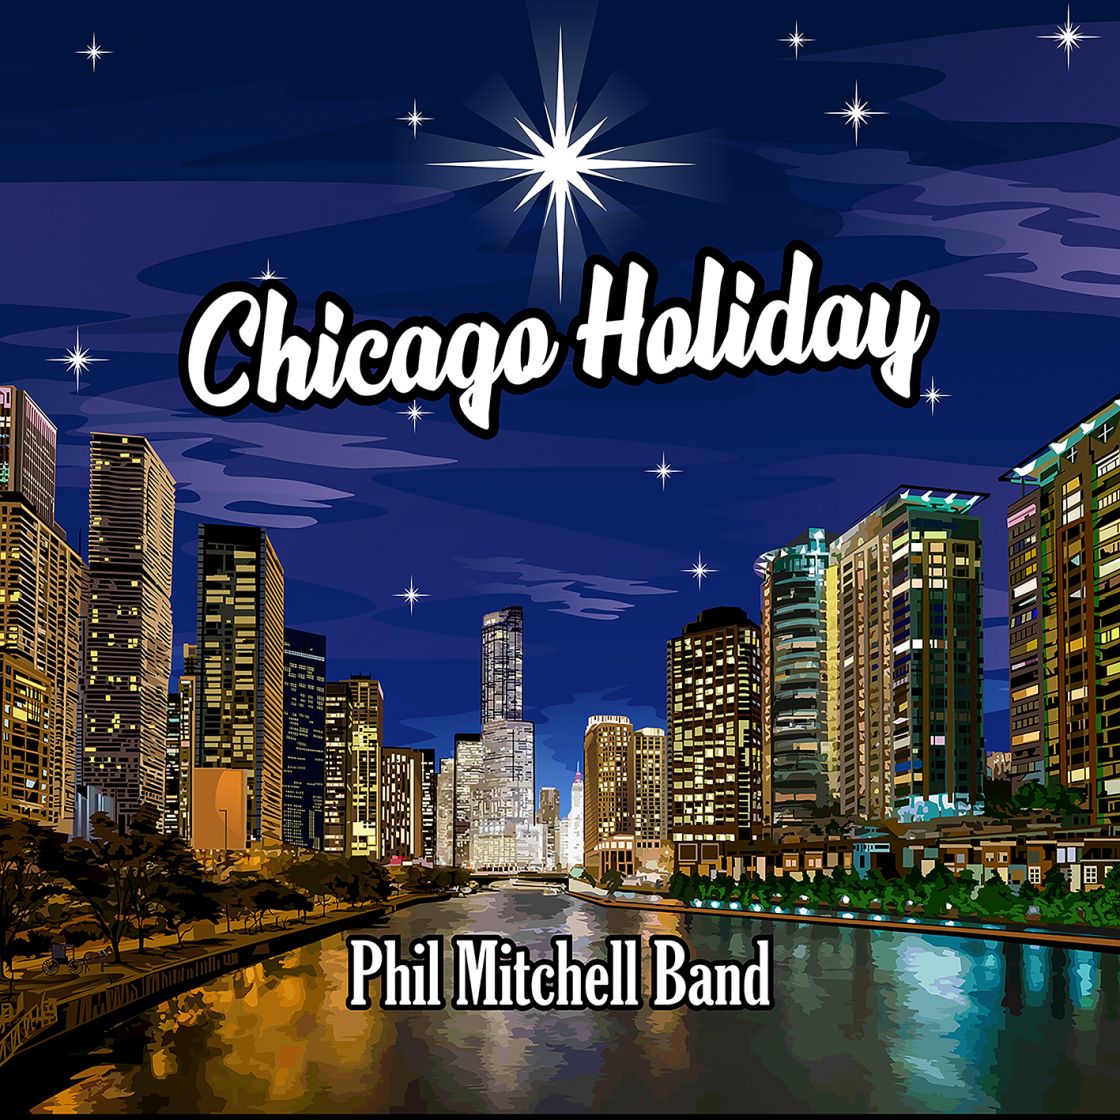 Chicago Holiday by the Phil Mitchell Band